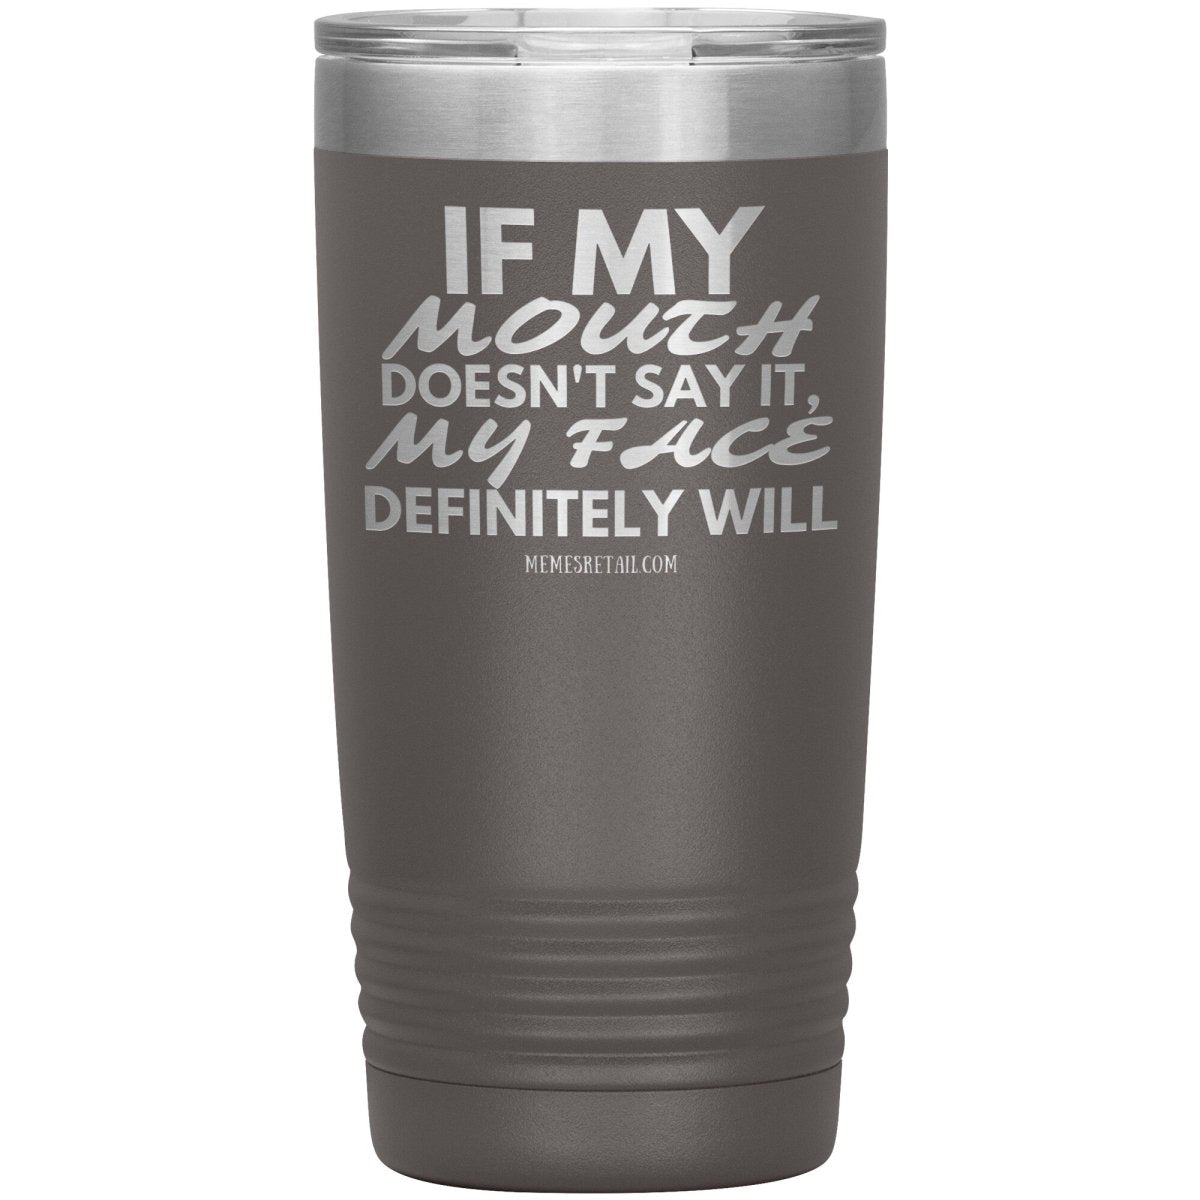 If my mouth doesn't say it, my face definitely will Tumblers, 20oz Insulated Tumbler / Pewter - MemesRetail.com